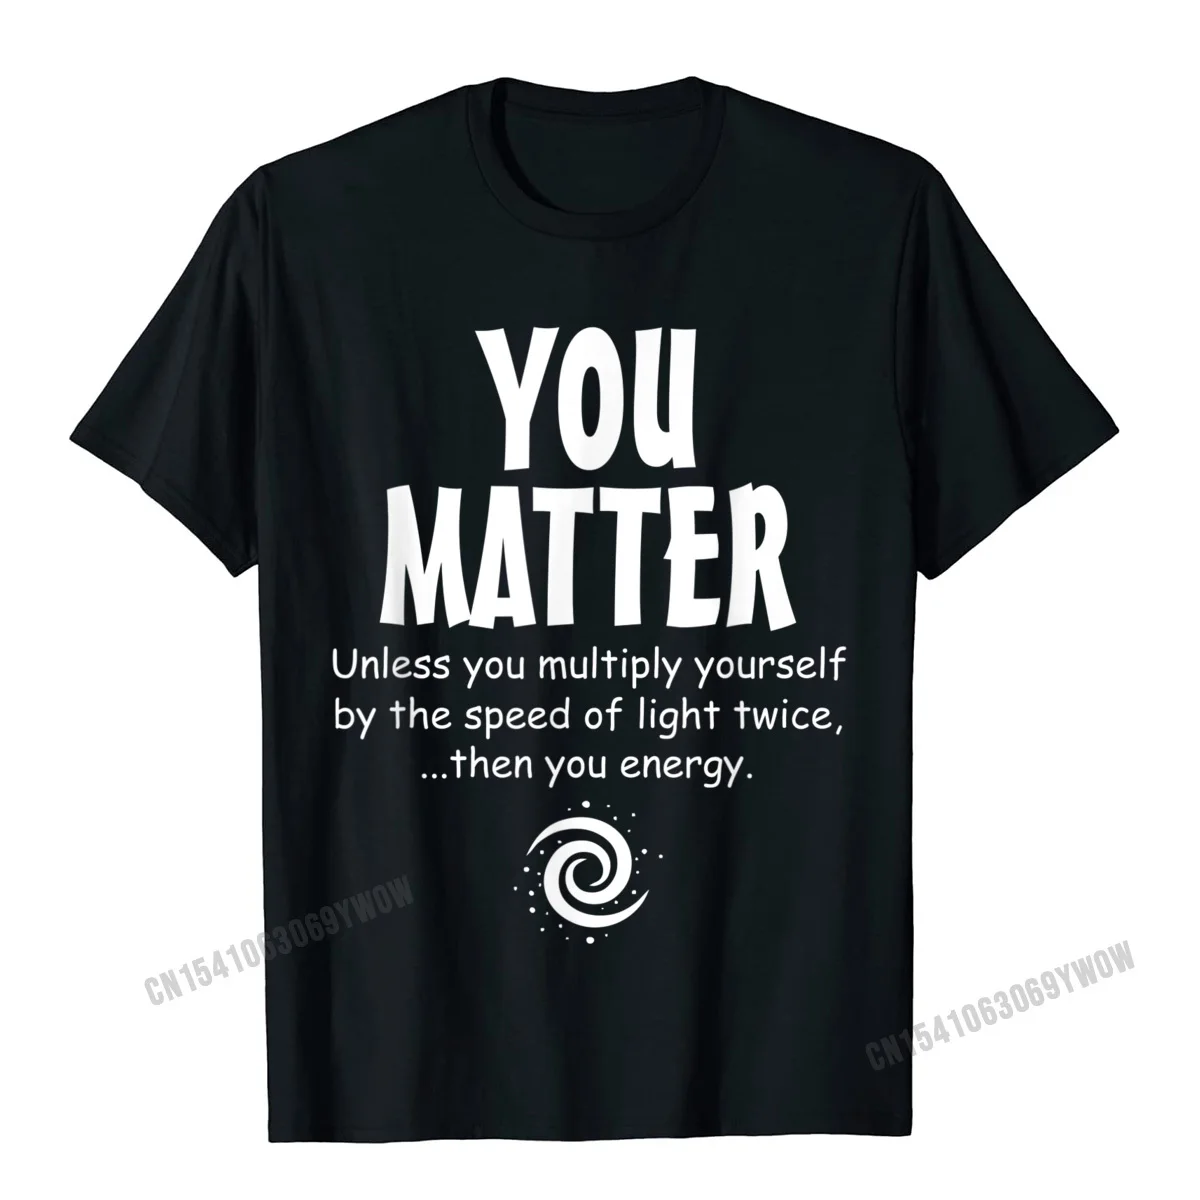 

You Matter - You Energy Funny Science T-Shirt Camisas Men T Shirts Normal Popular Adult Tops Shirts Normal Cotton